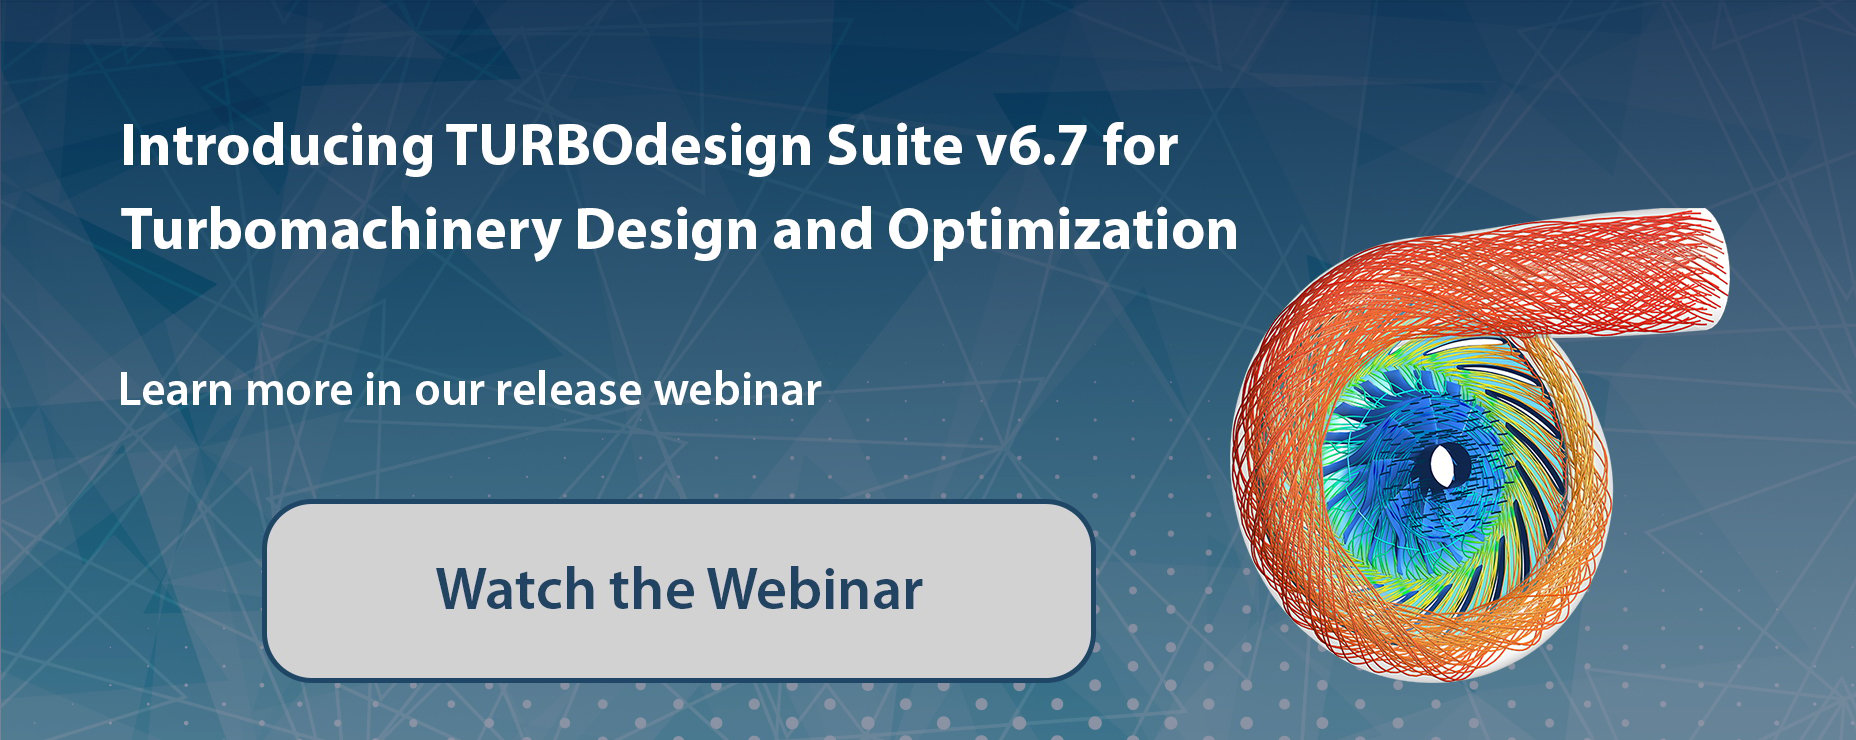 An Update to TURBOdesign Suite 6.7